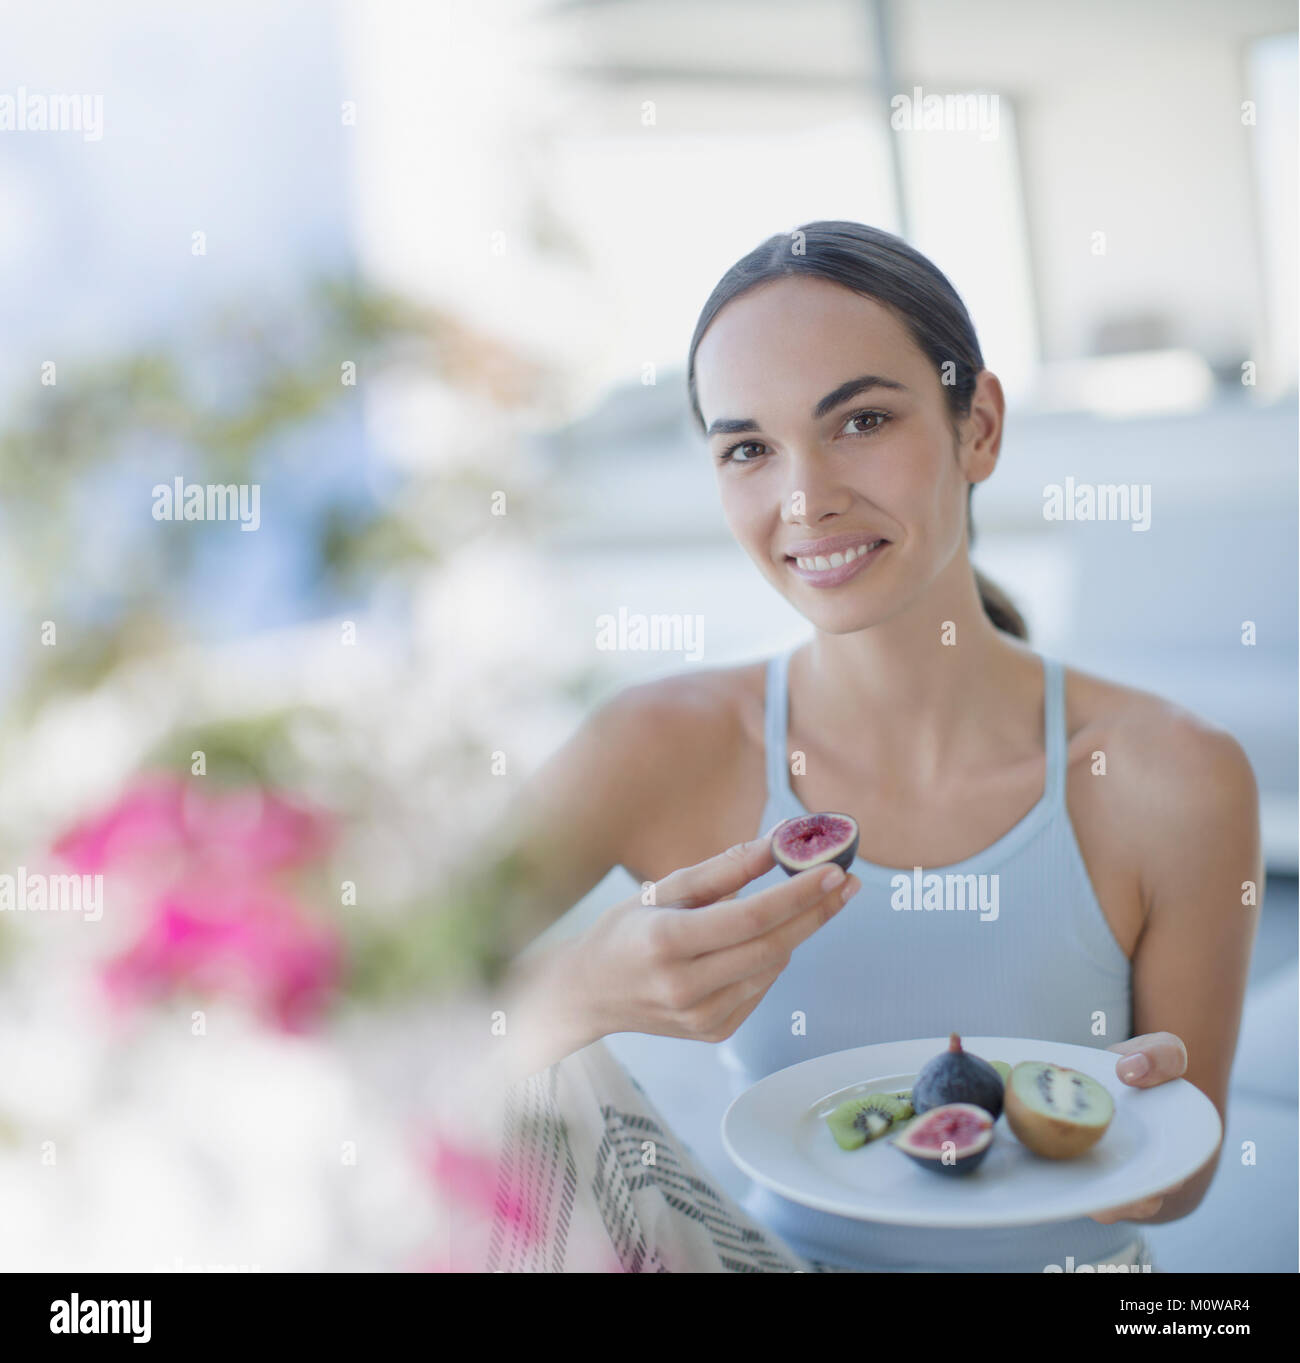 Portrait smiling brunette woman eating figs and kiwi Stock Photo